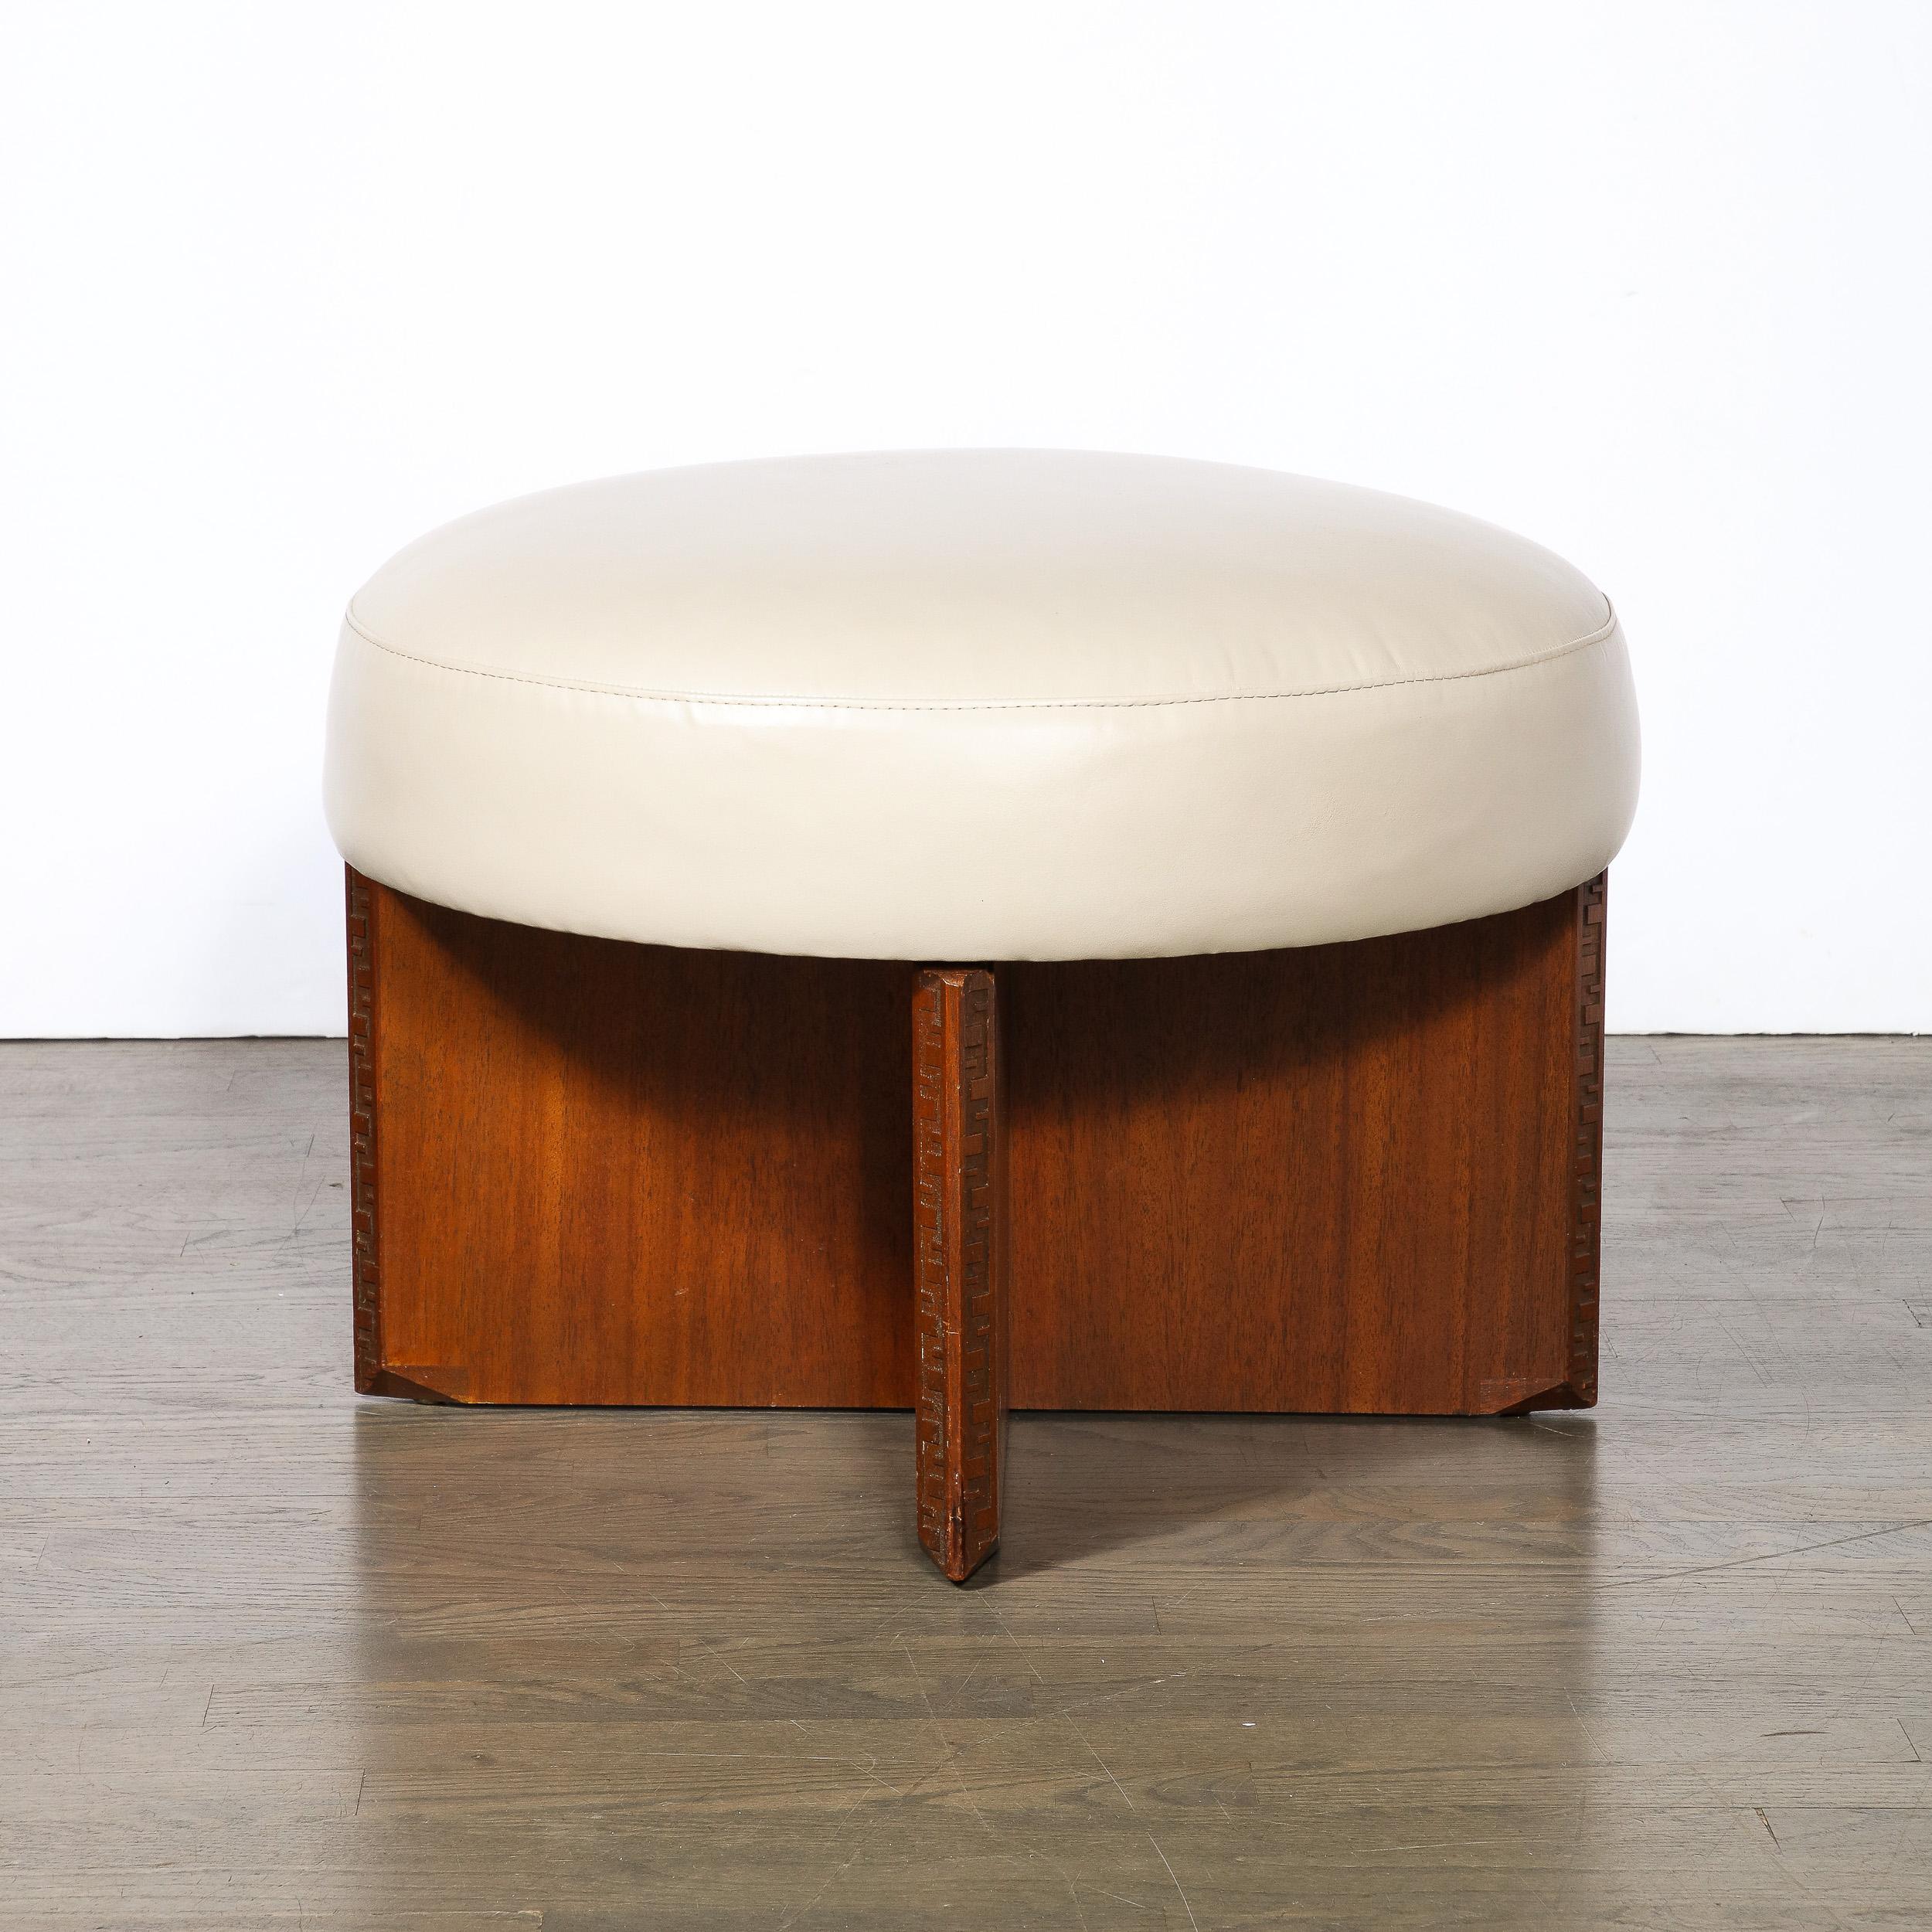 This rare and highly sought after Mid-Century Modernist Rotating Stool/ Ottoman in Holly Hunt Leather is by Frank Lloyd Wright for Heritage Henrendon, and originates from the United States, C. 1955/56. Features a rectilinear x-form base in Mahogany